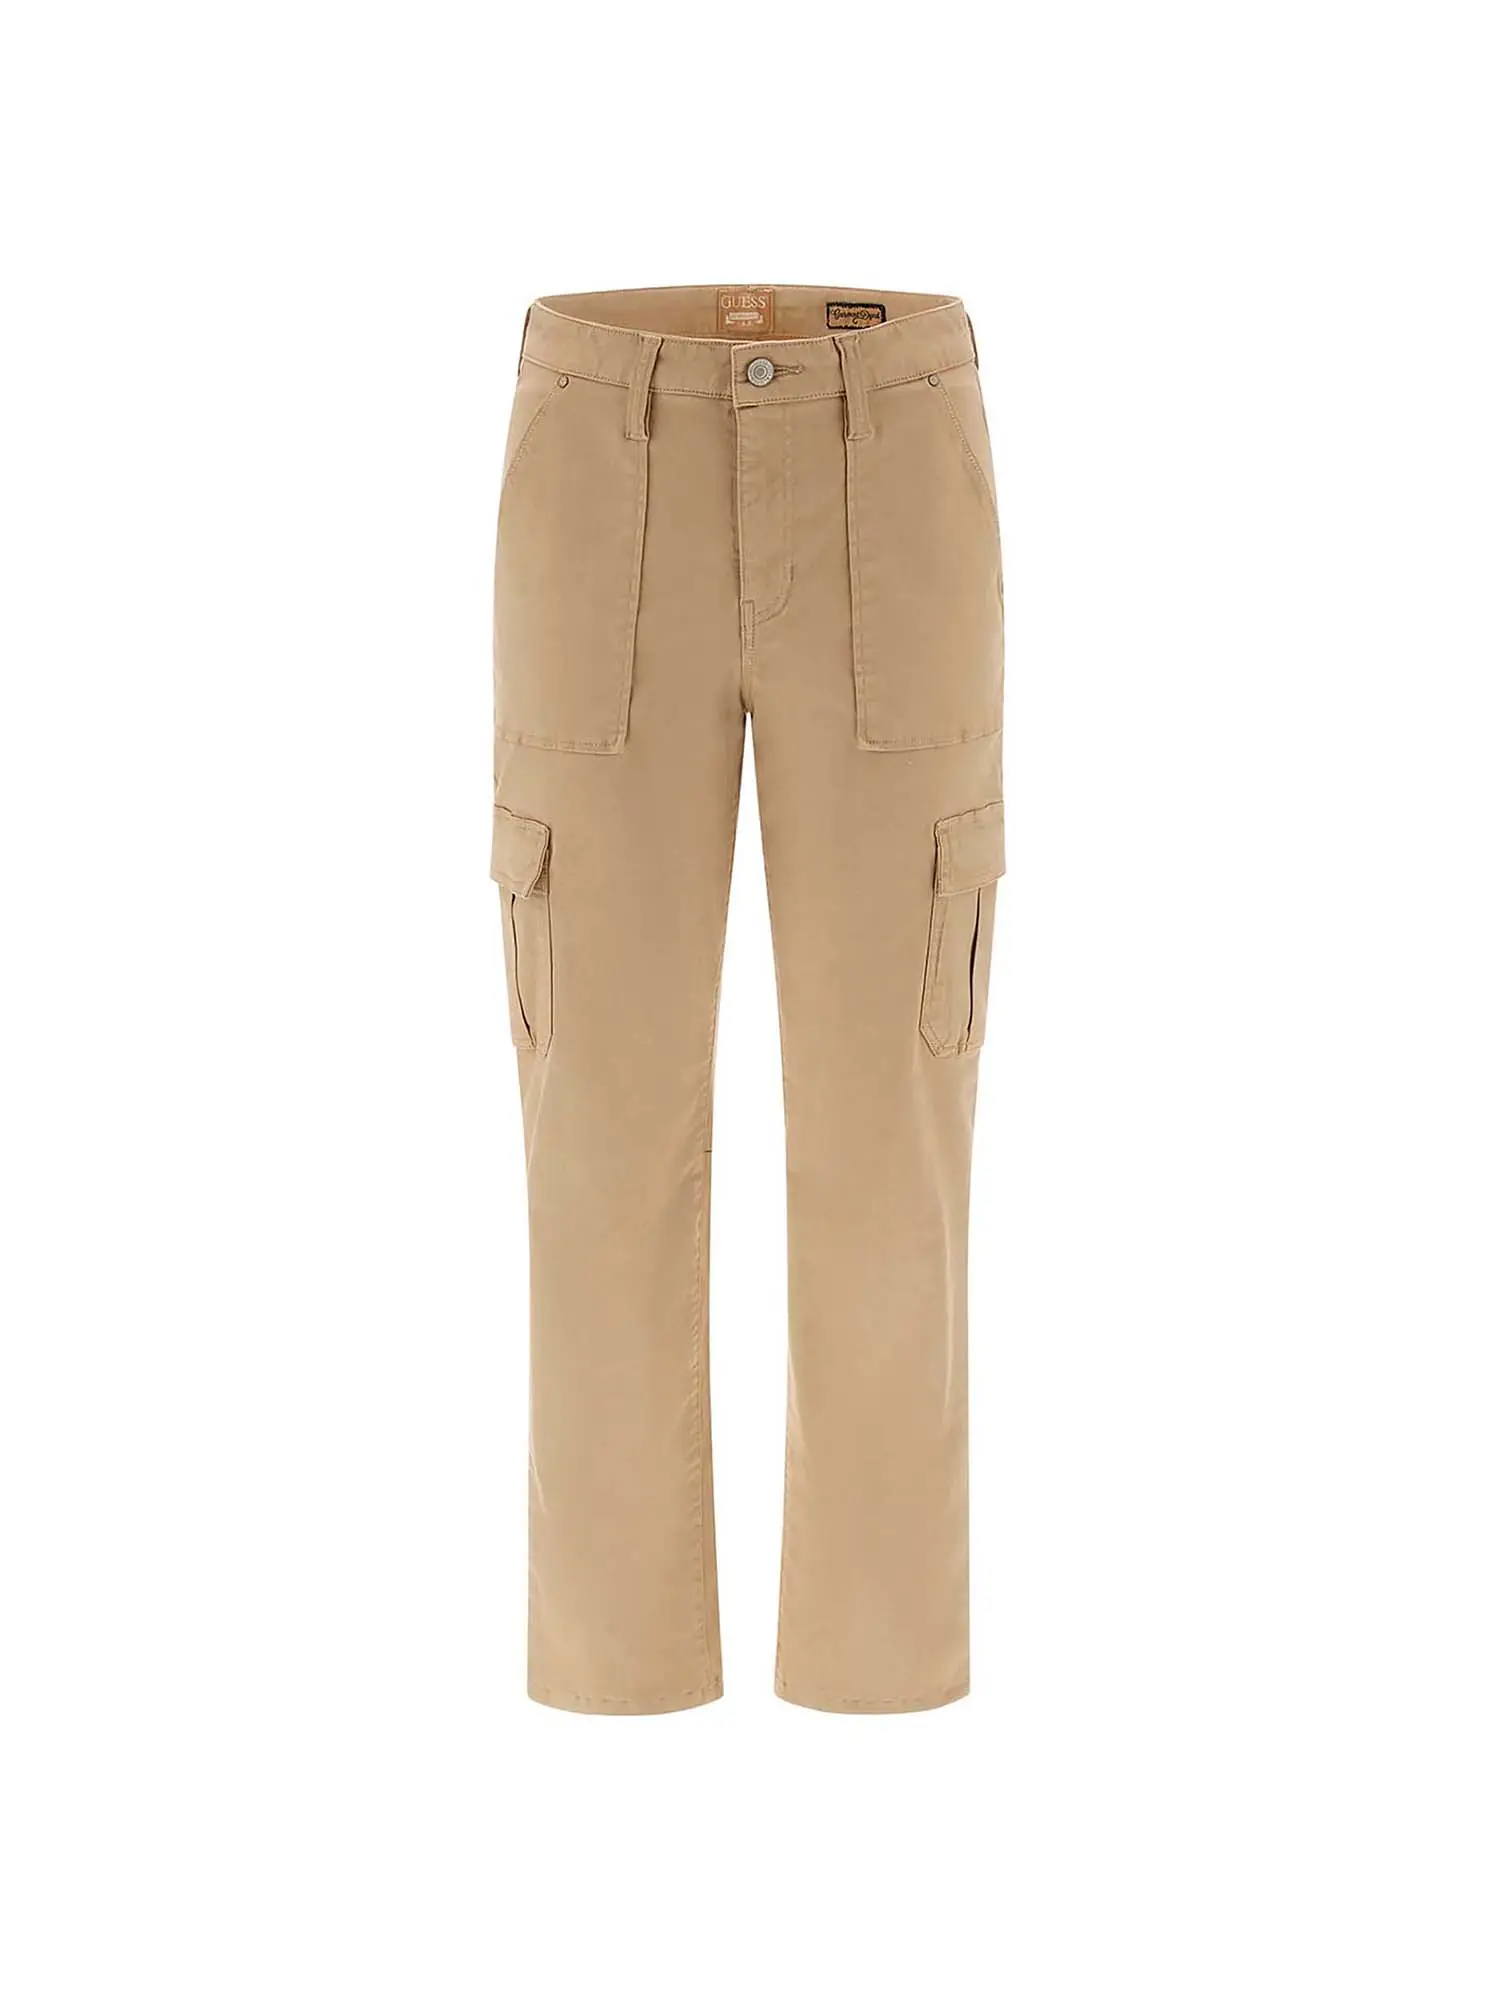 PANTALONE DONNA - GUESS JEANS - W4RB59 W93CL - TAUPE, L